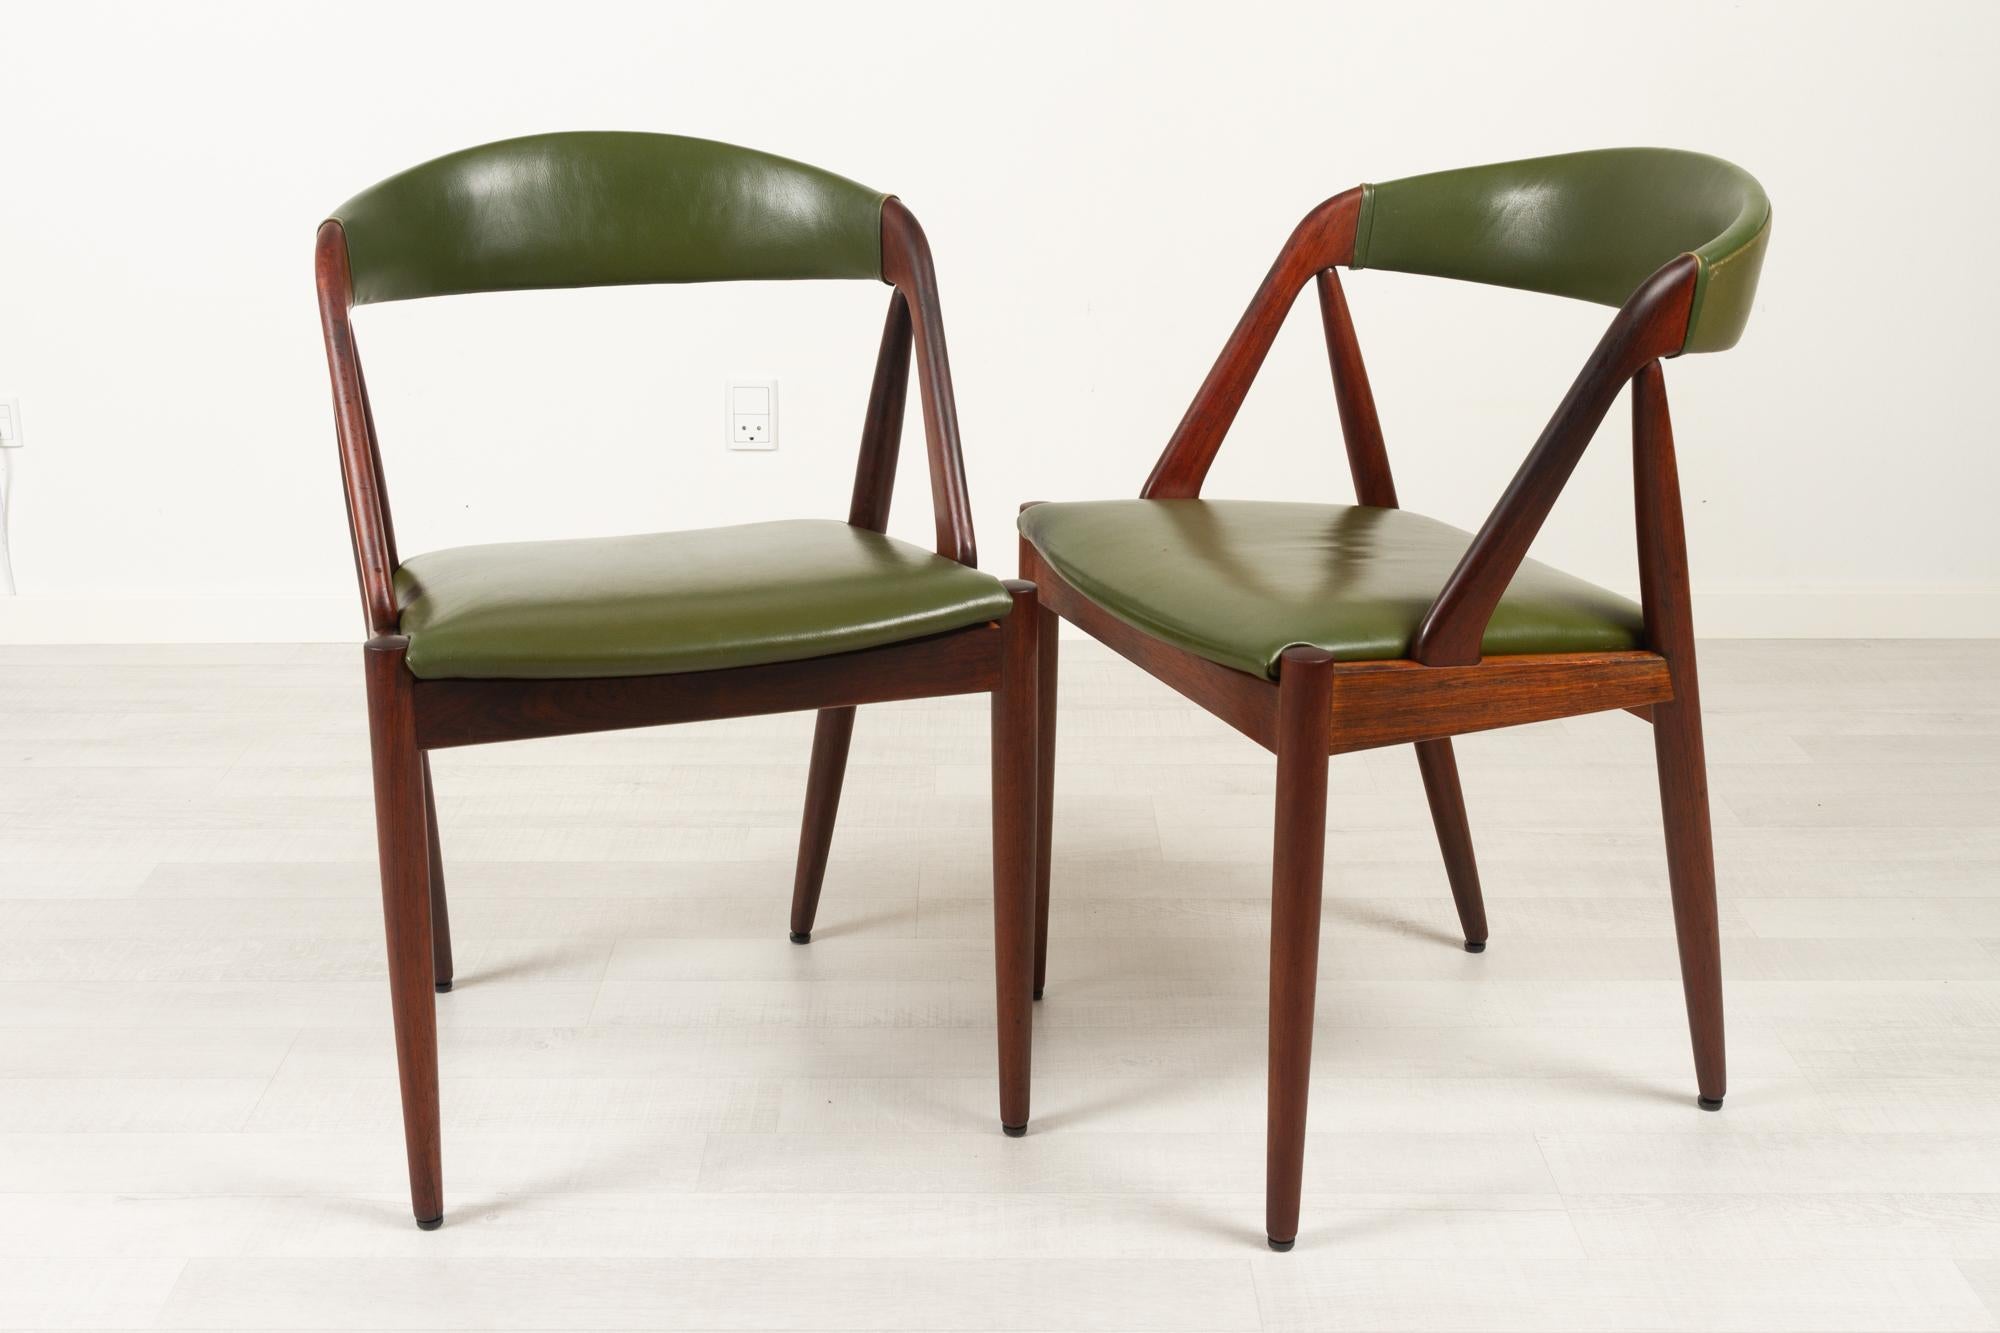 Mid-20th Century Danish Modern Rosewood Dining Chairs by Kai Kristiansen 1960s, Set of 6